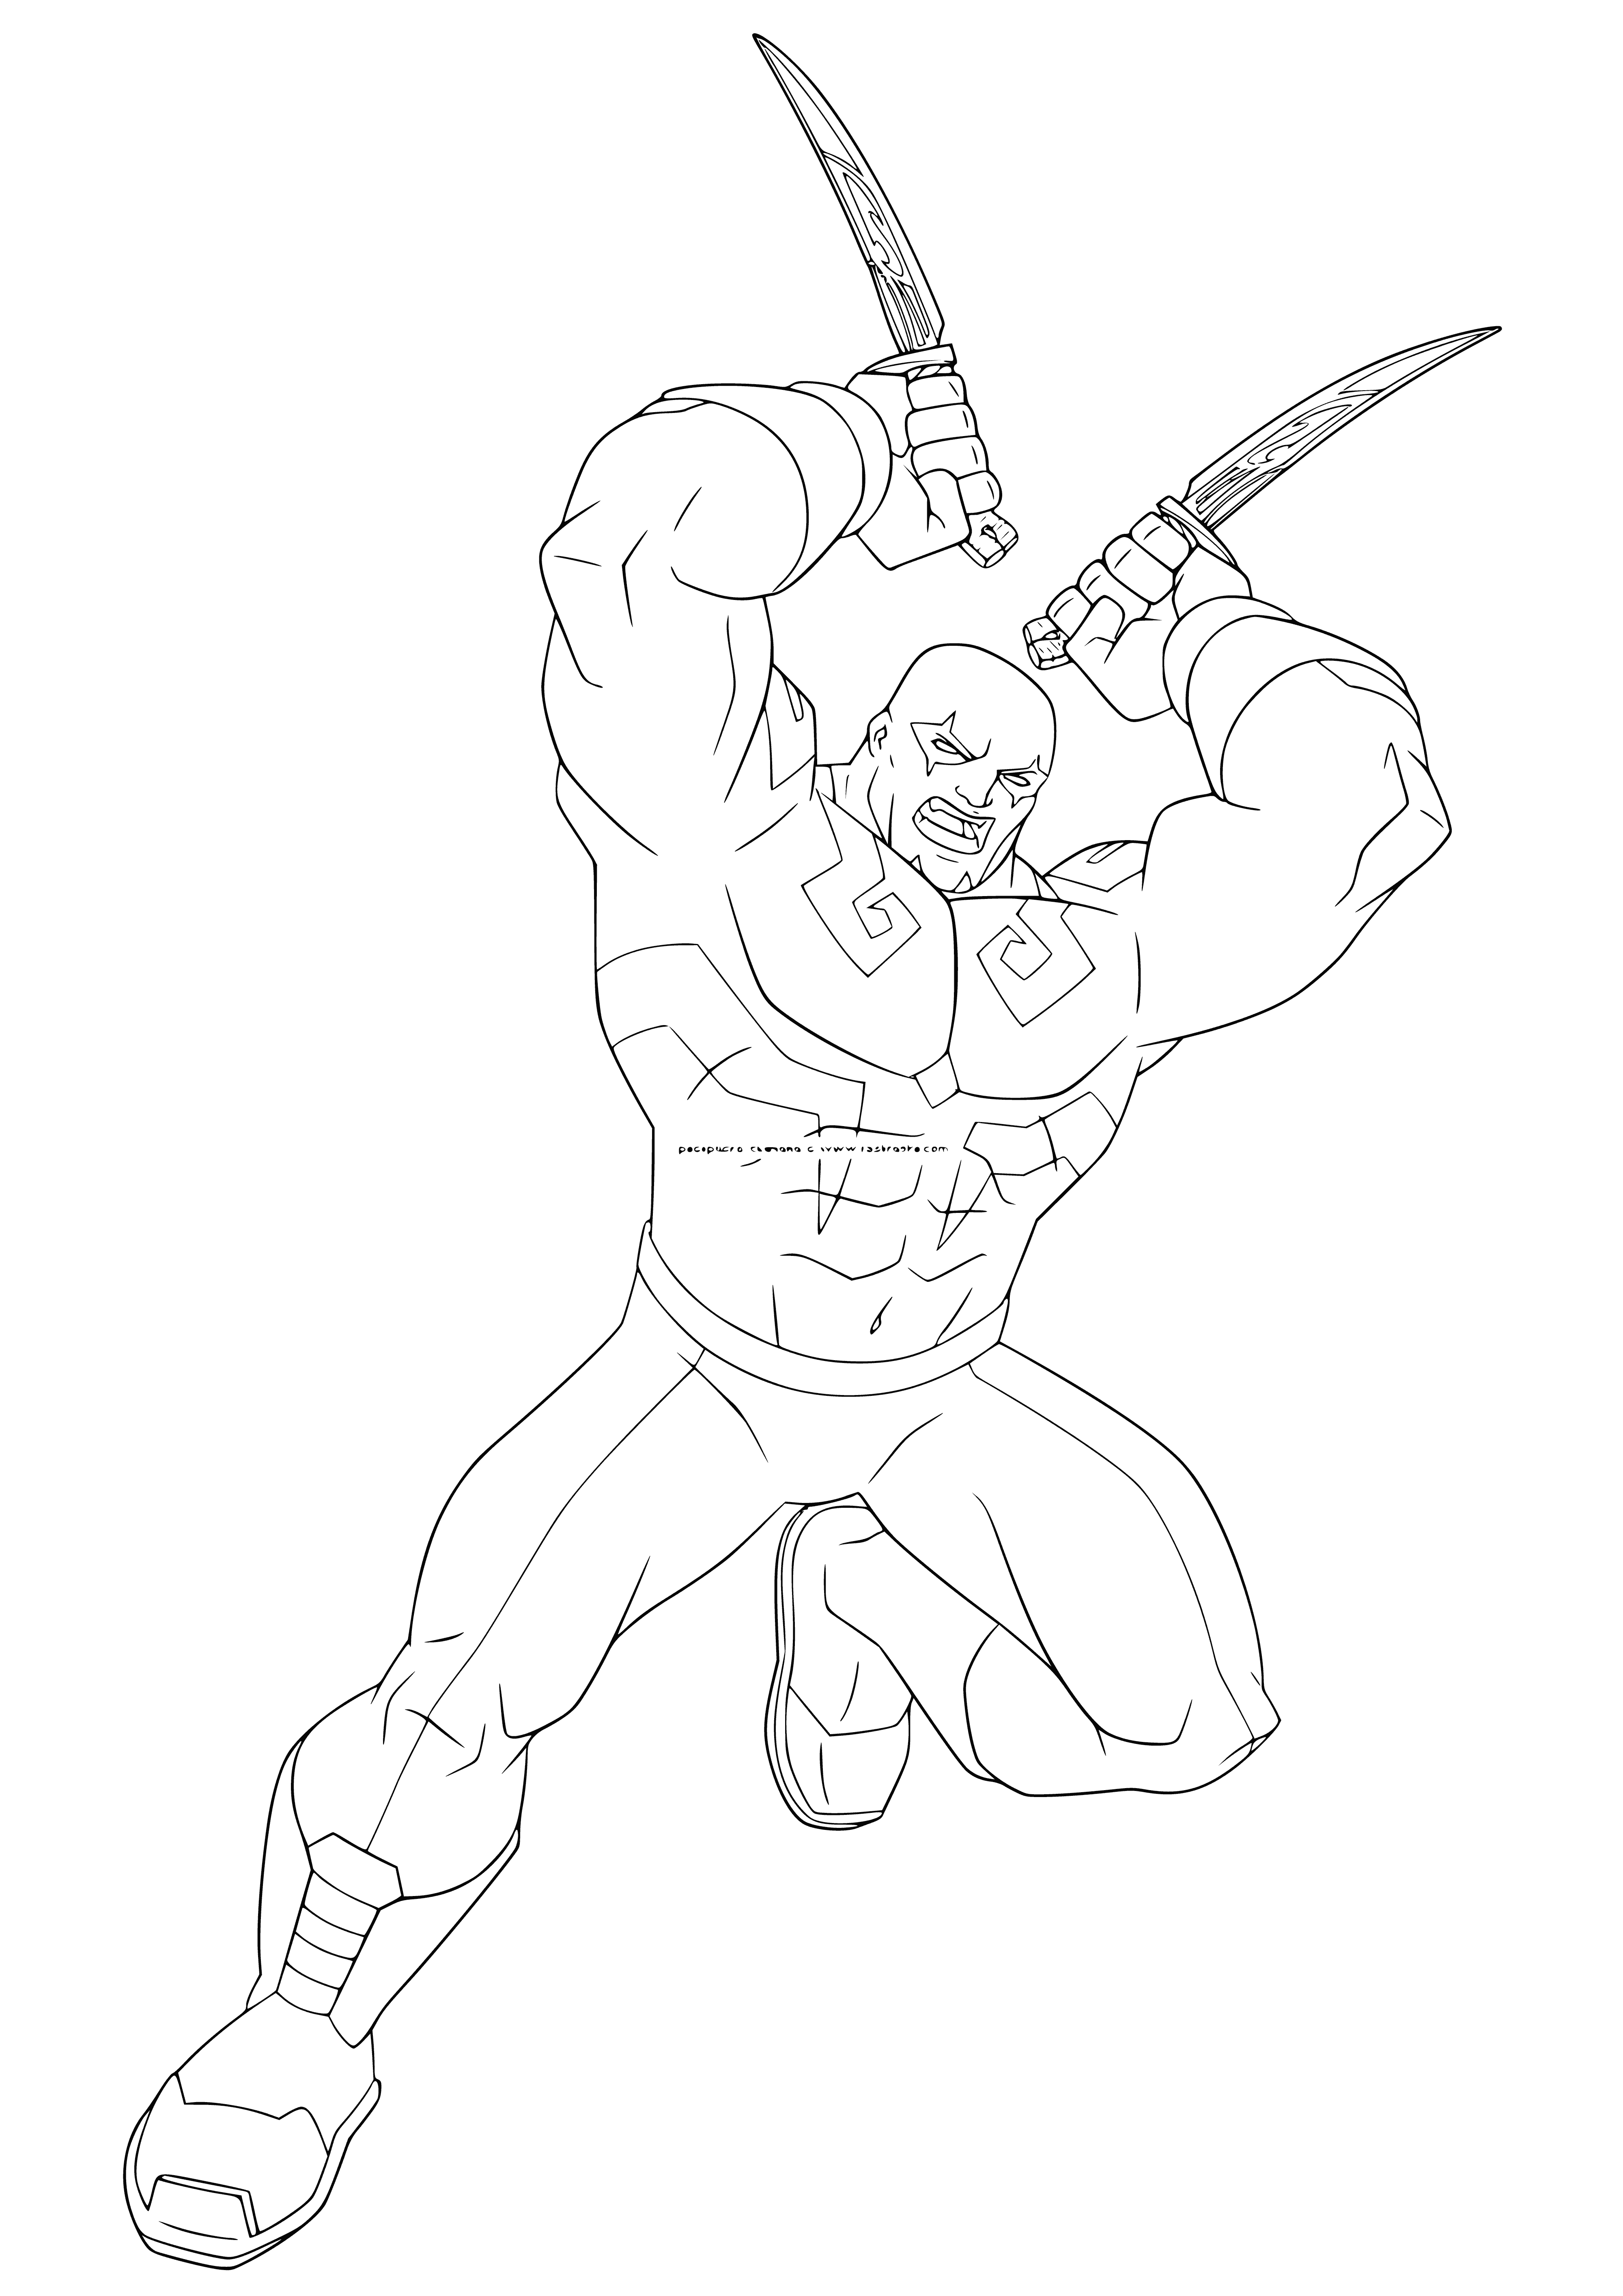 coloring page: Coloring page of serious-looking bald man w/ green tattoos, red loincloth & large knife; eyes closed.